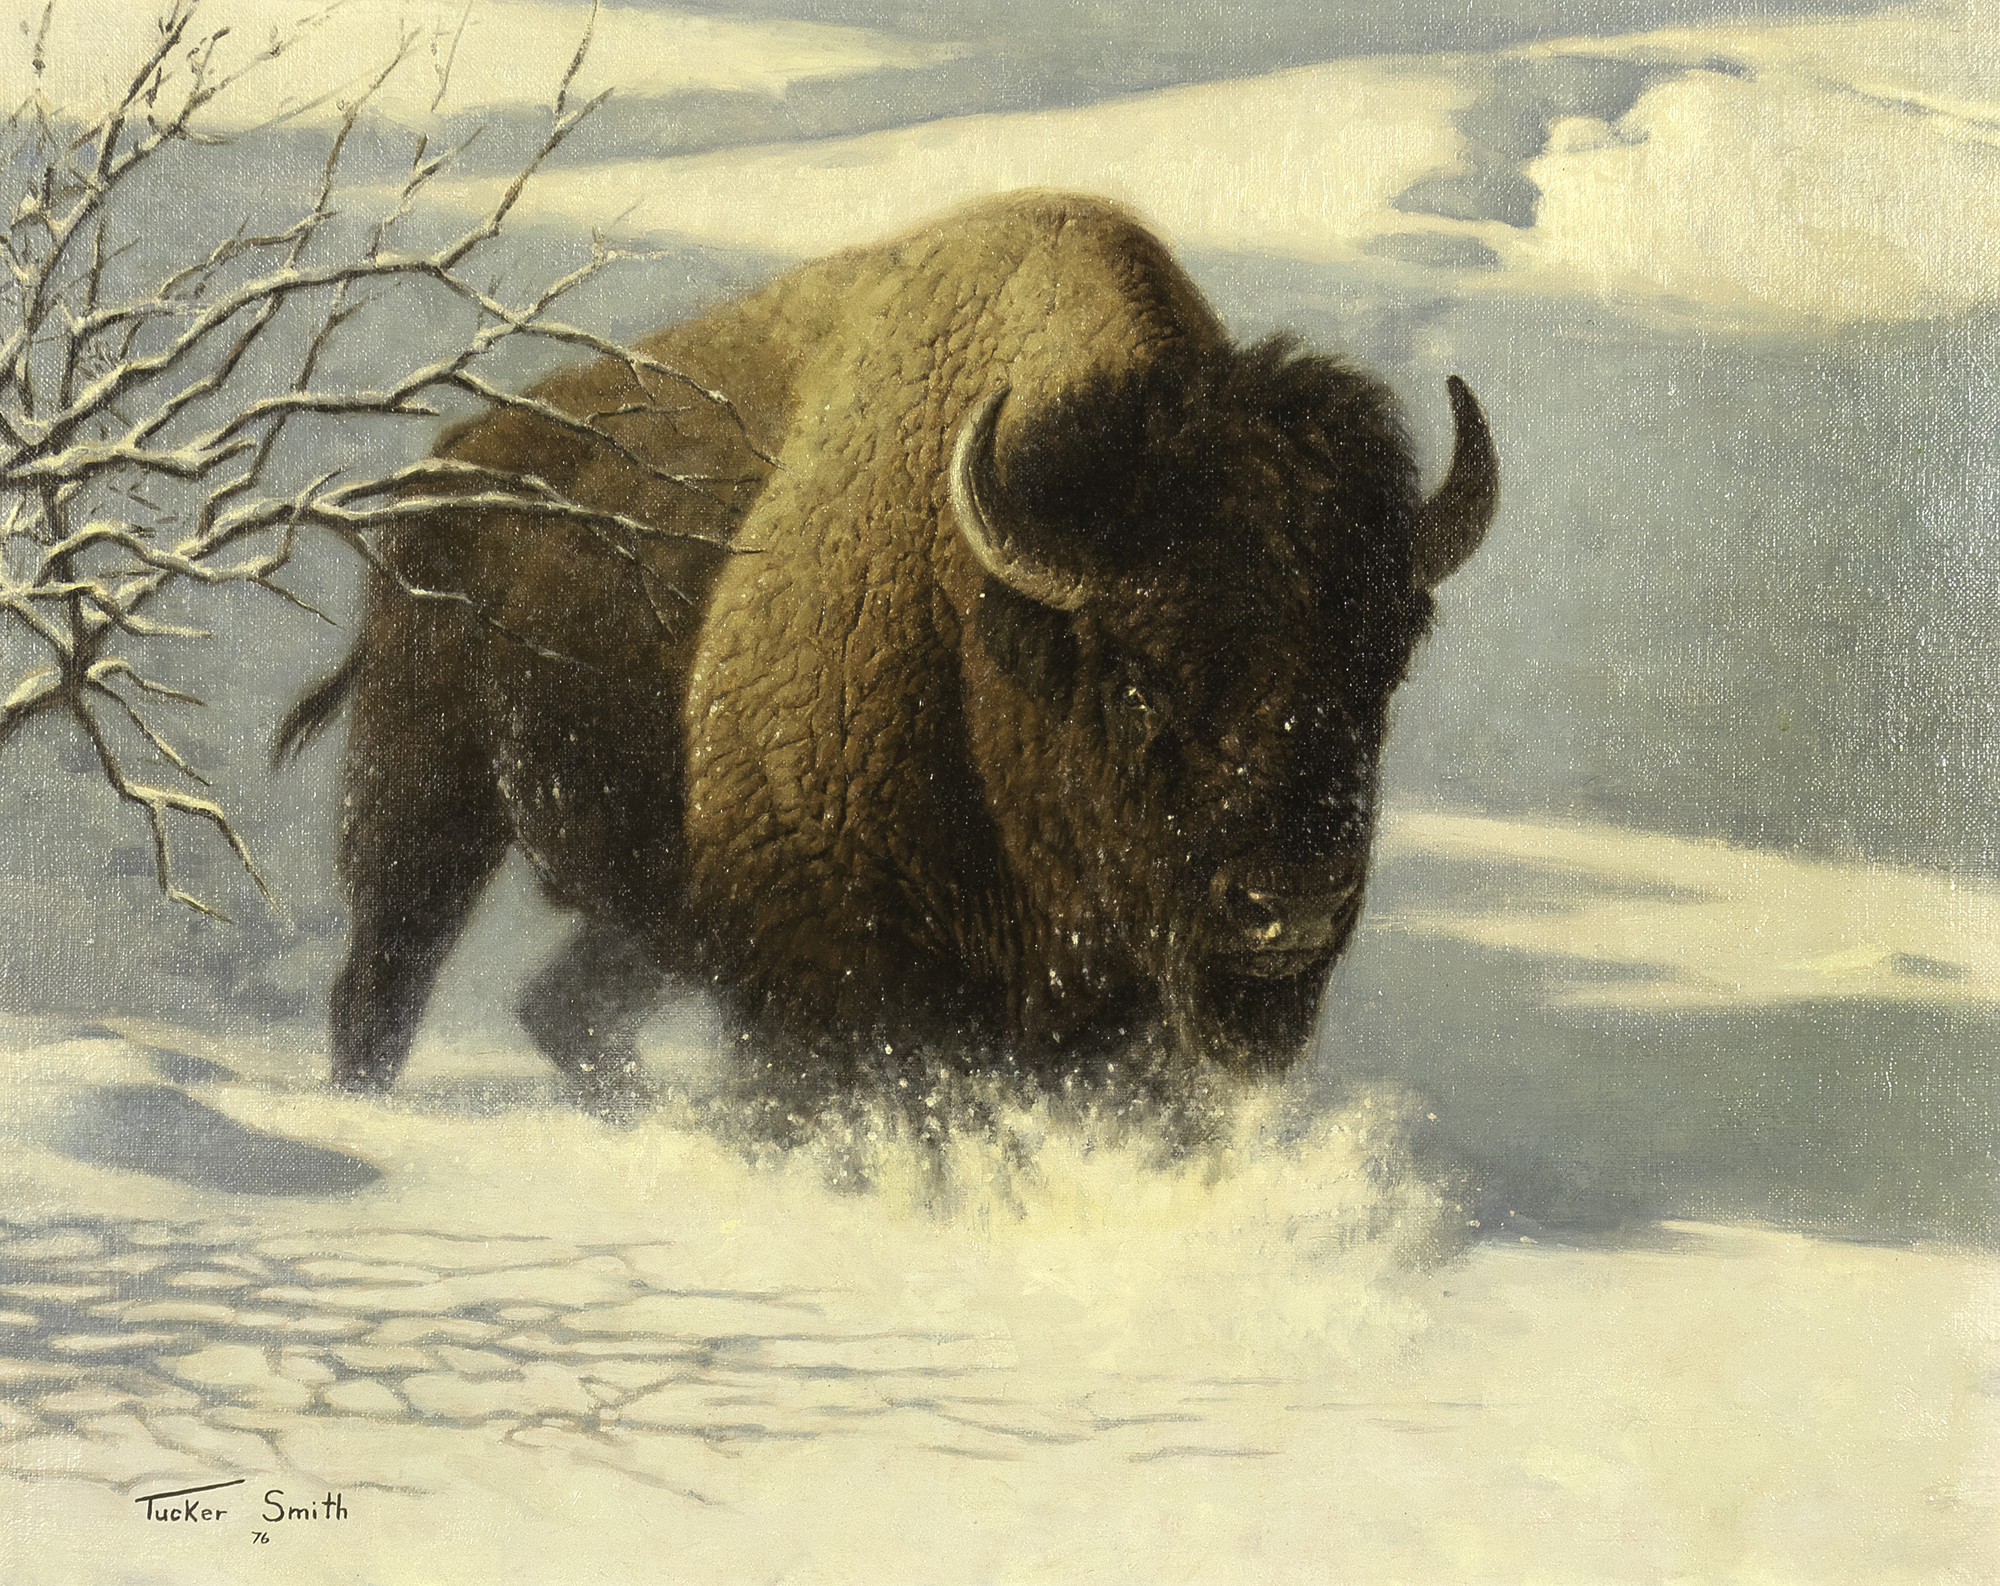 TUCKER SMITH (1940- ), BISON AND